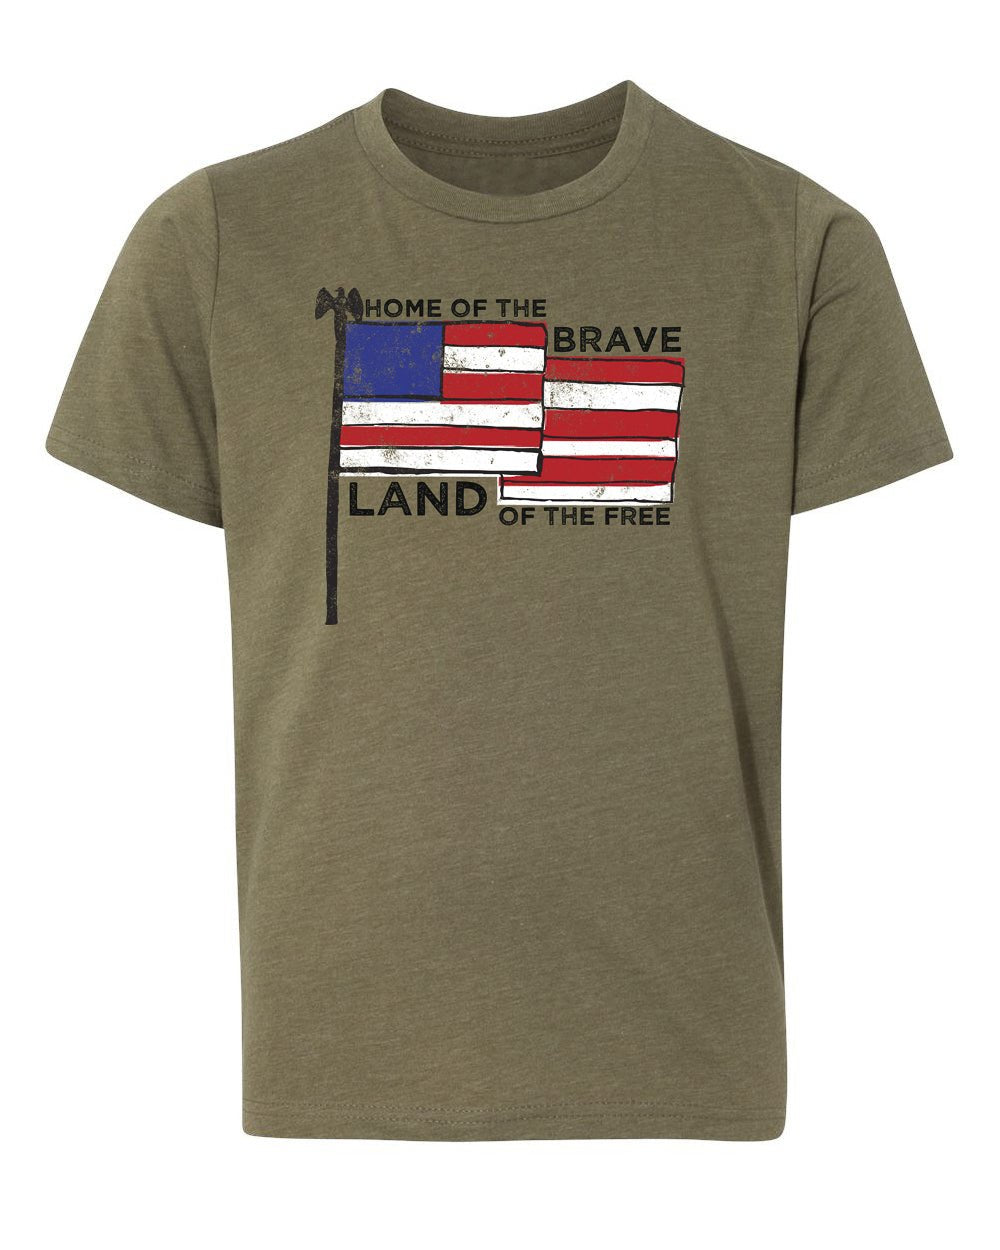 Land of the Free, Home of the Brave Kids 4th of July T Shirts - Mato & Hash